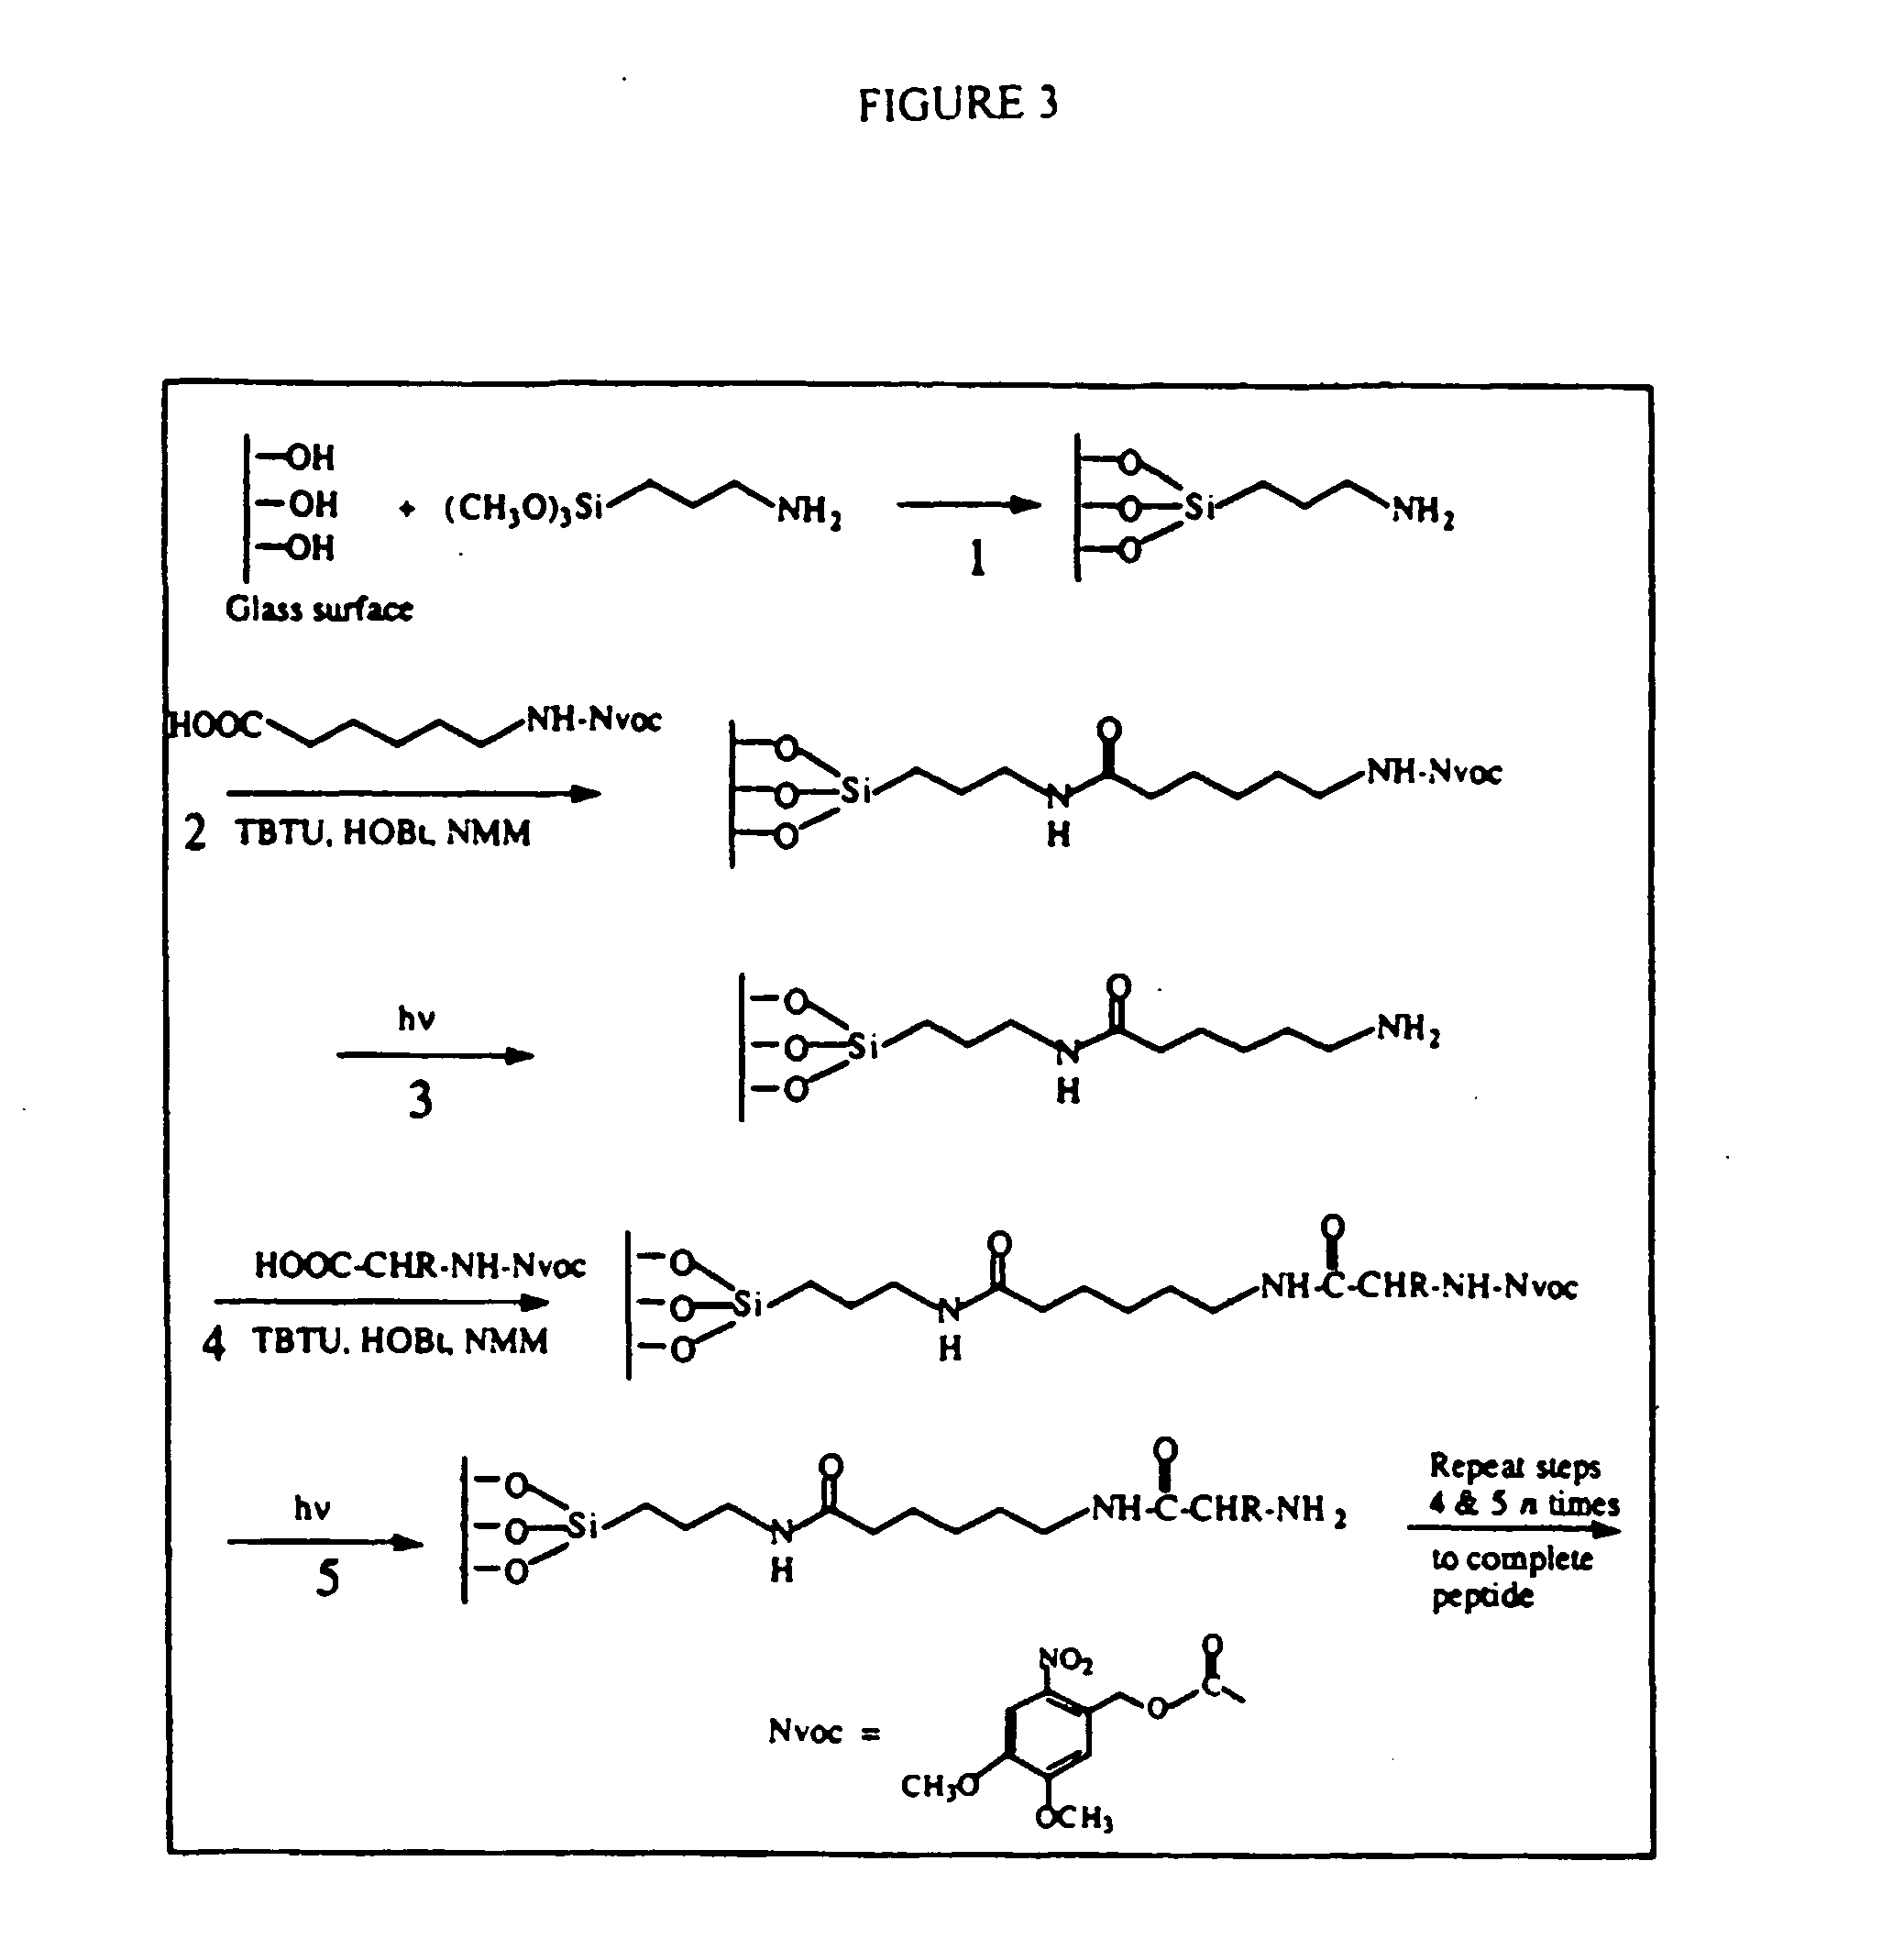 Apparatus, composition and method for proteome profiling